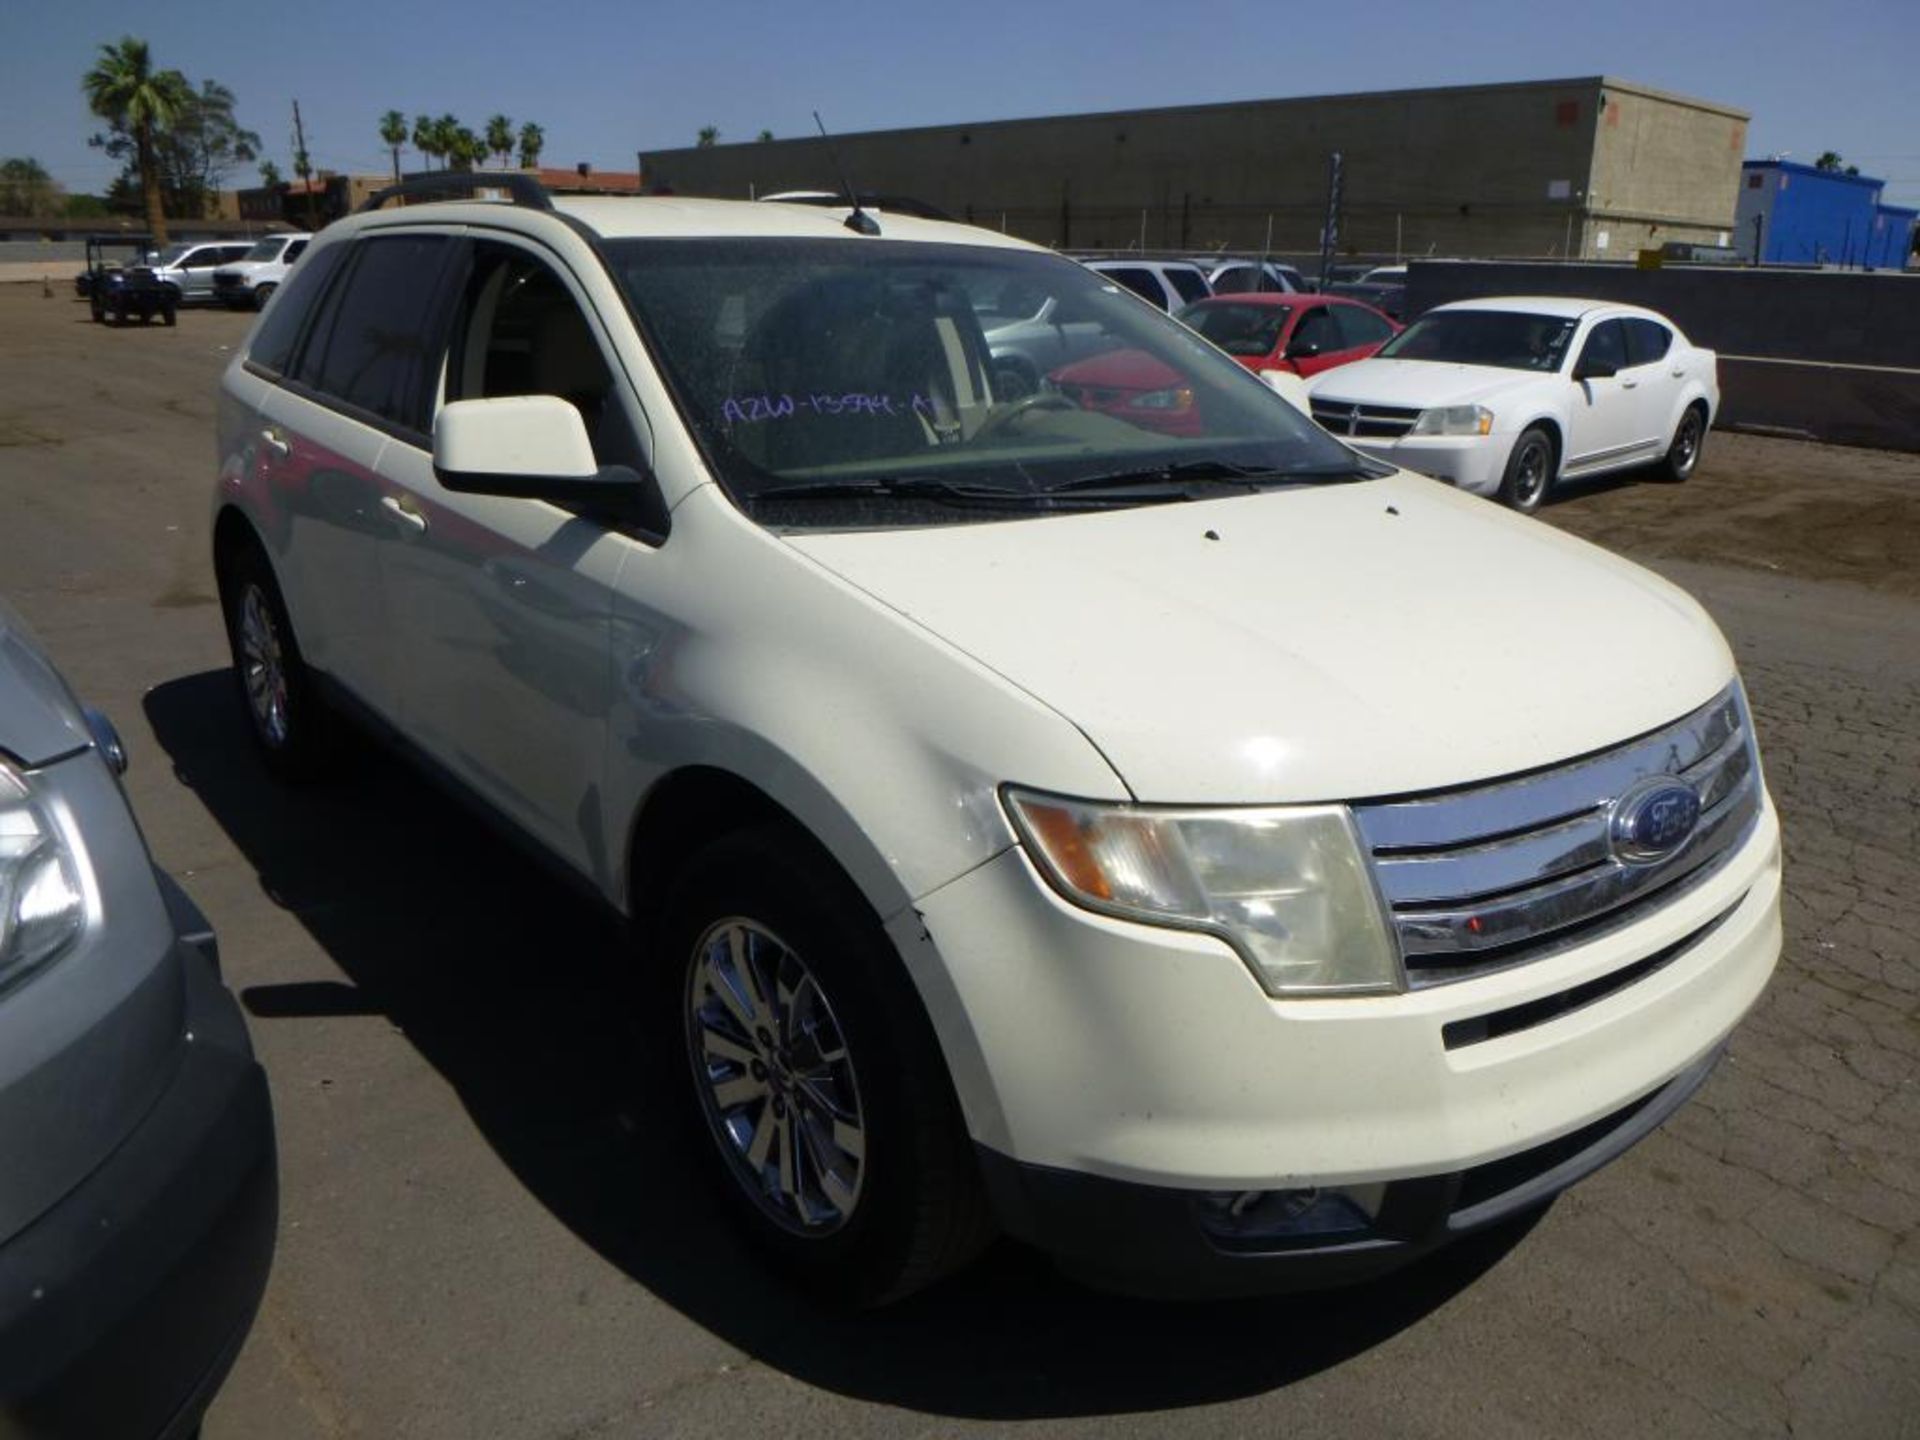 (Lot # 3309) 2007 Ford Edge - Image 2 of 13